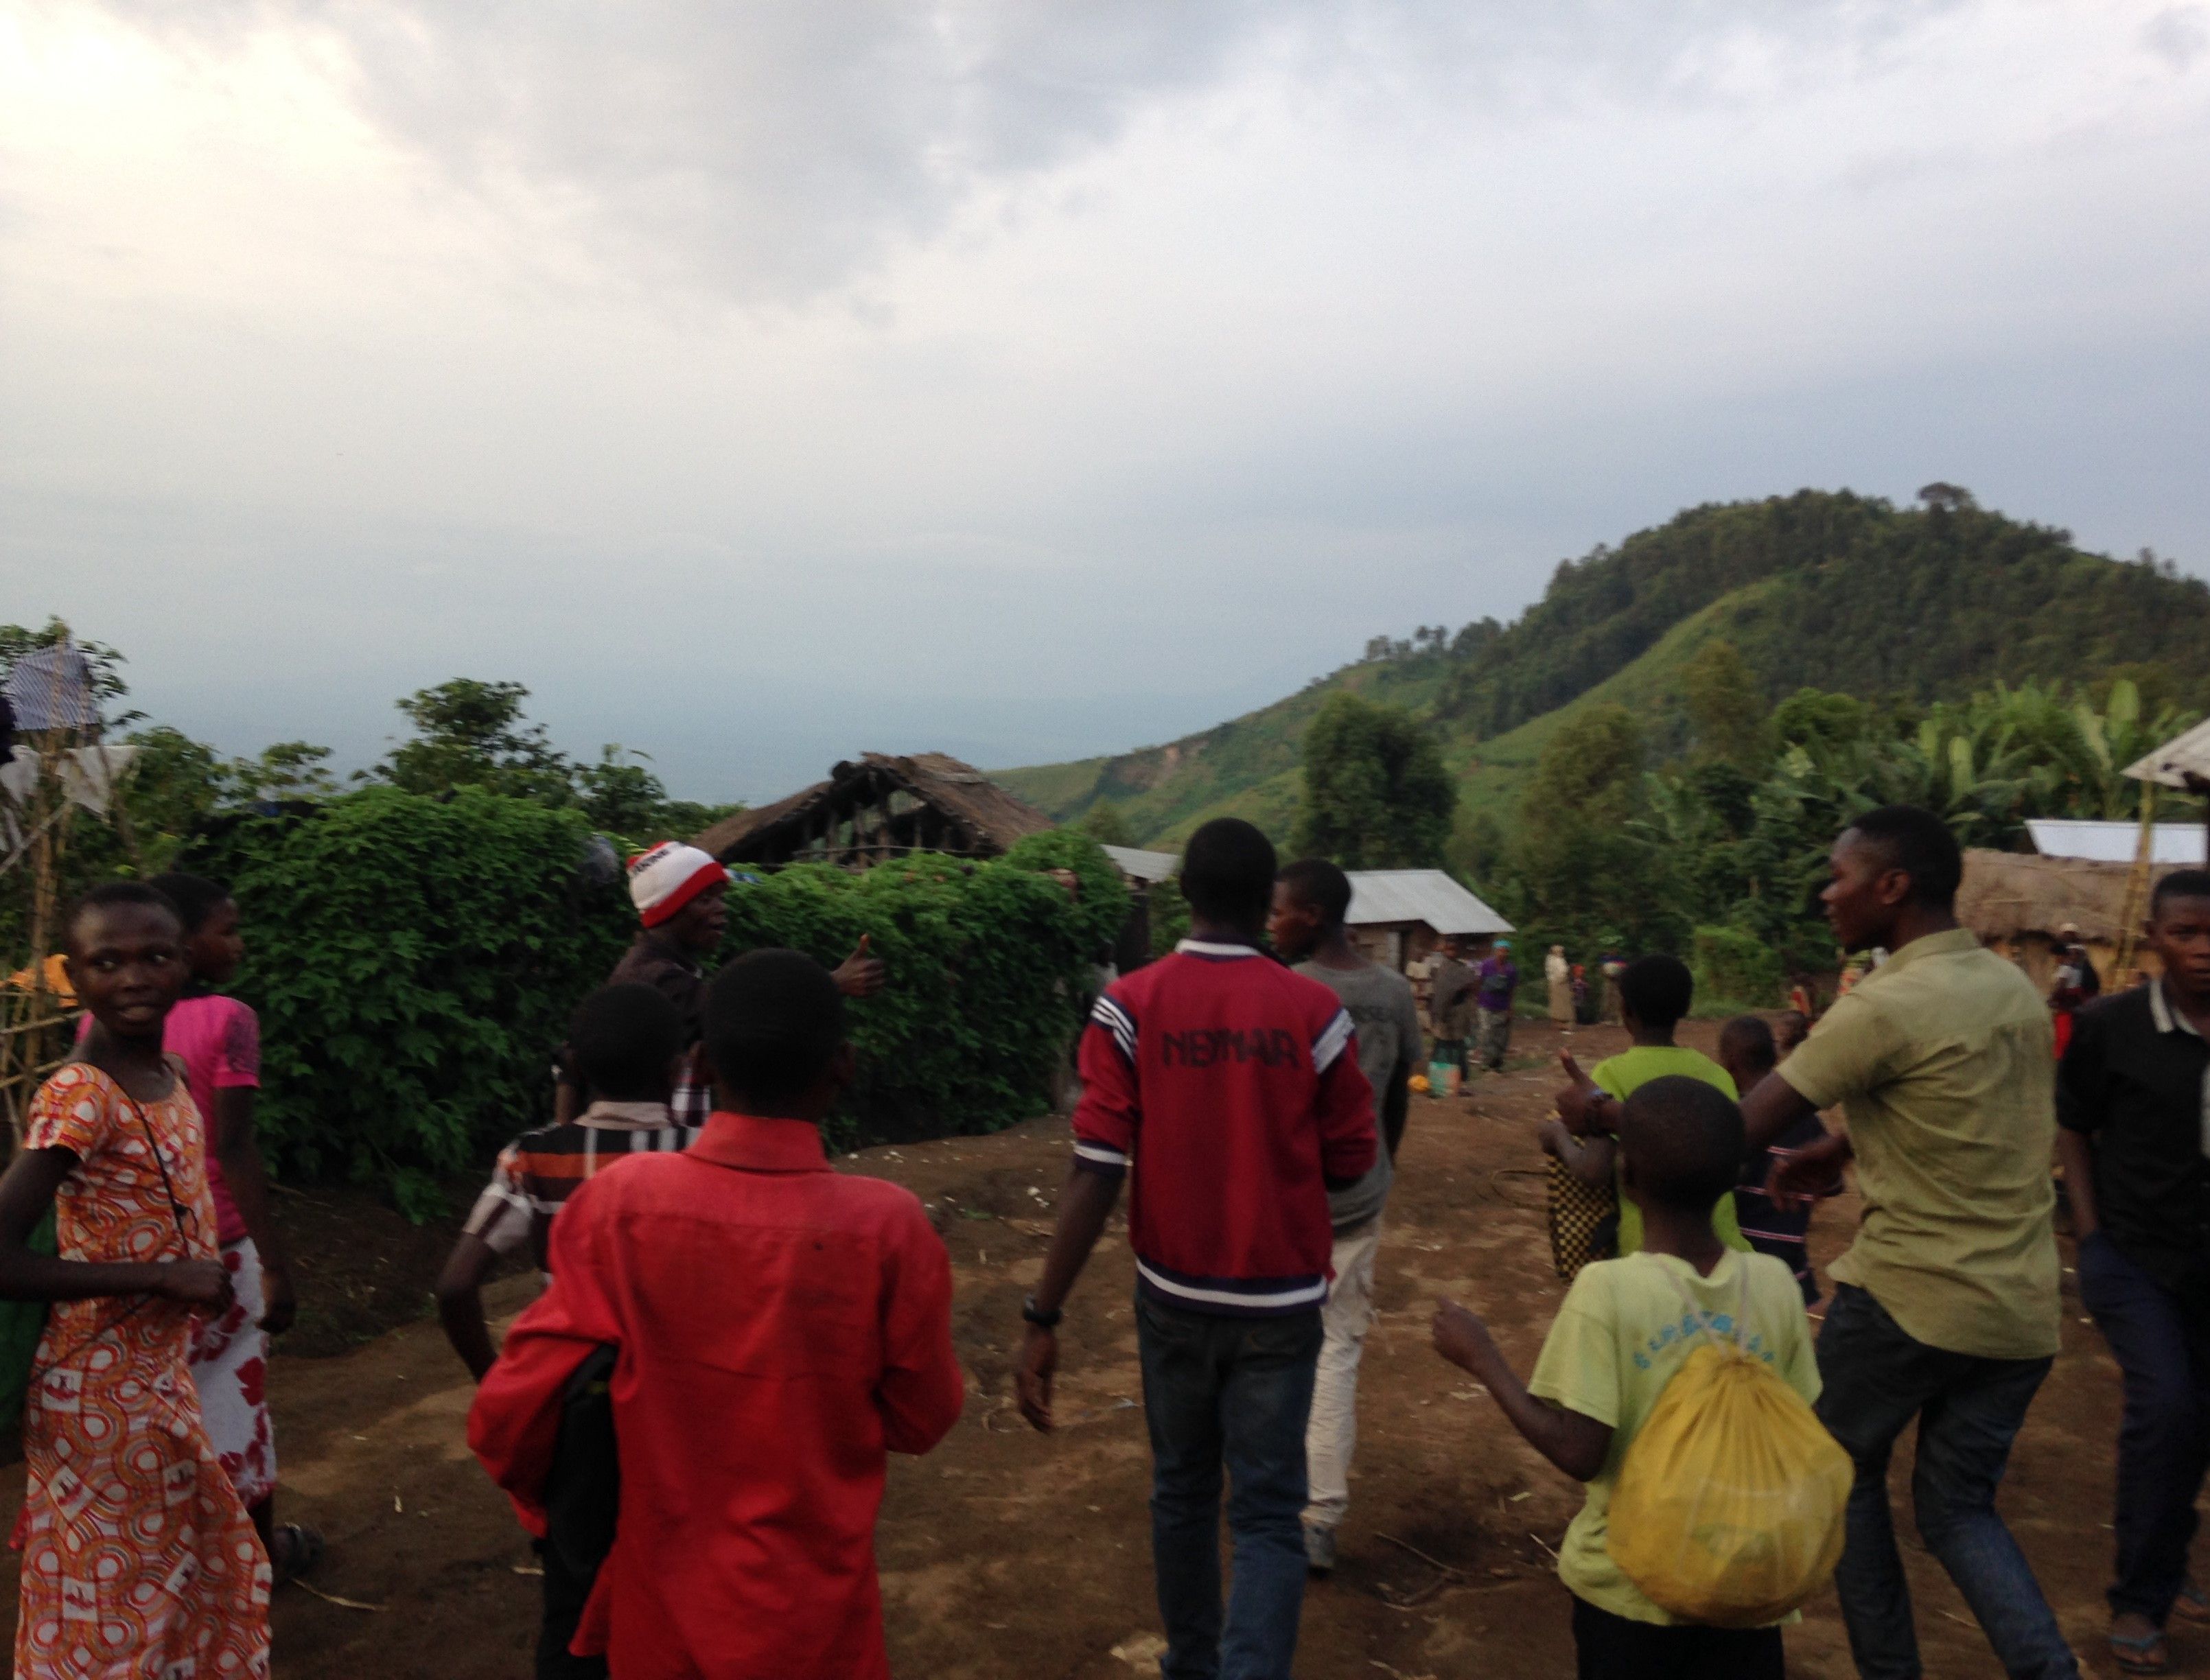 After a long day of hiking, runners head down to Kirotshe from the mountain village.